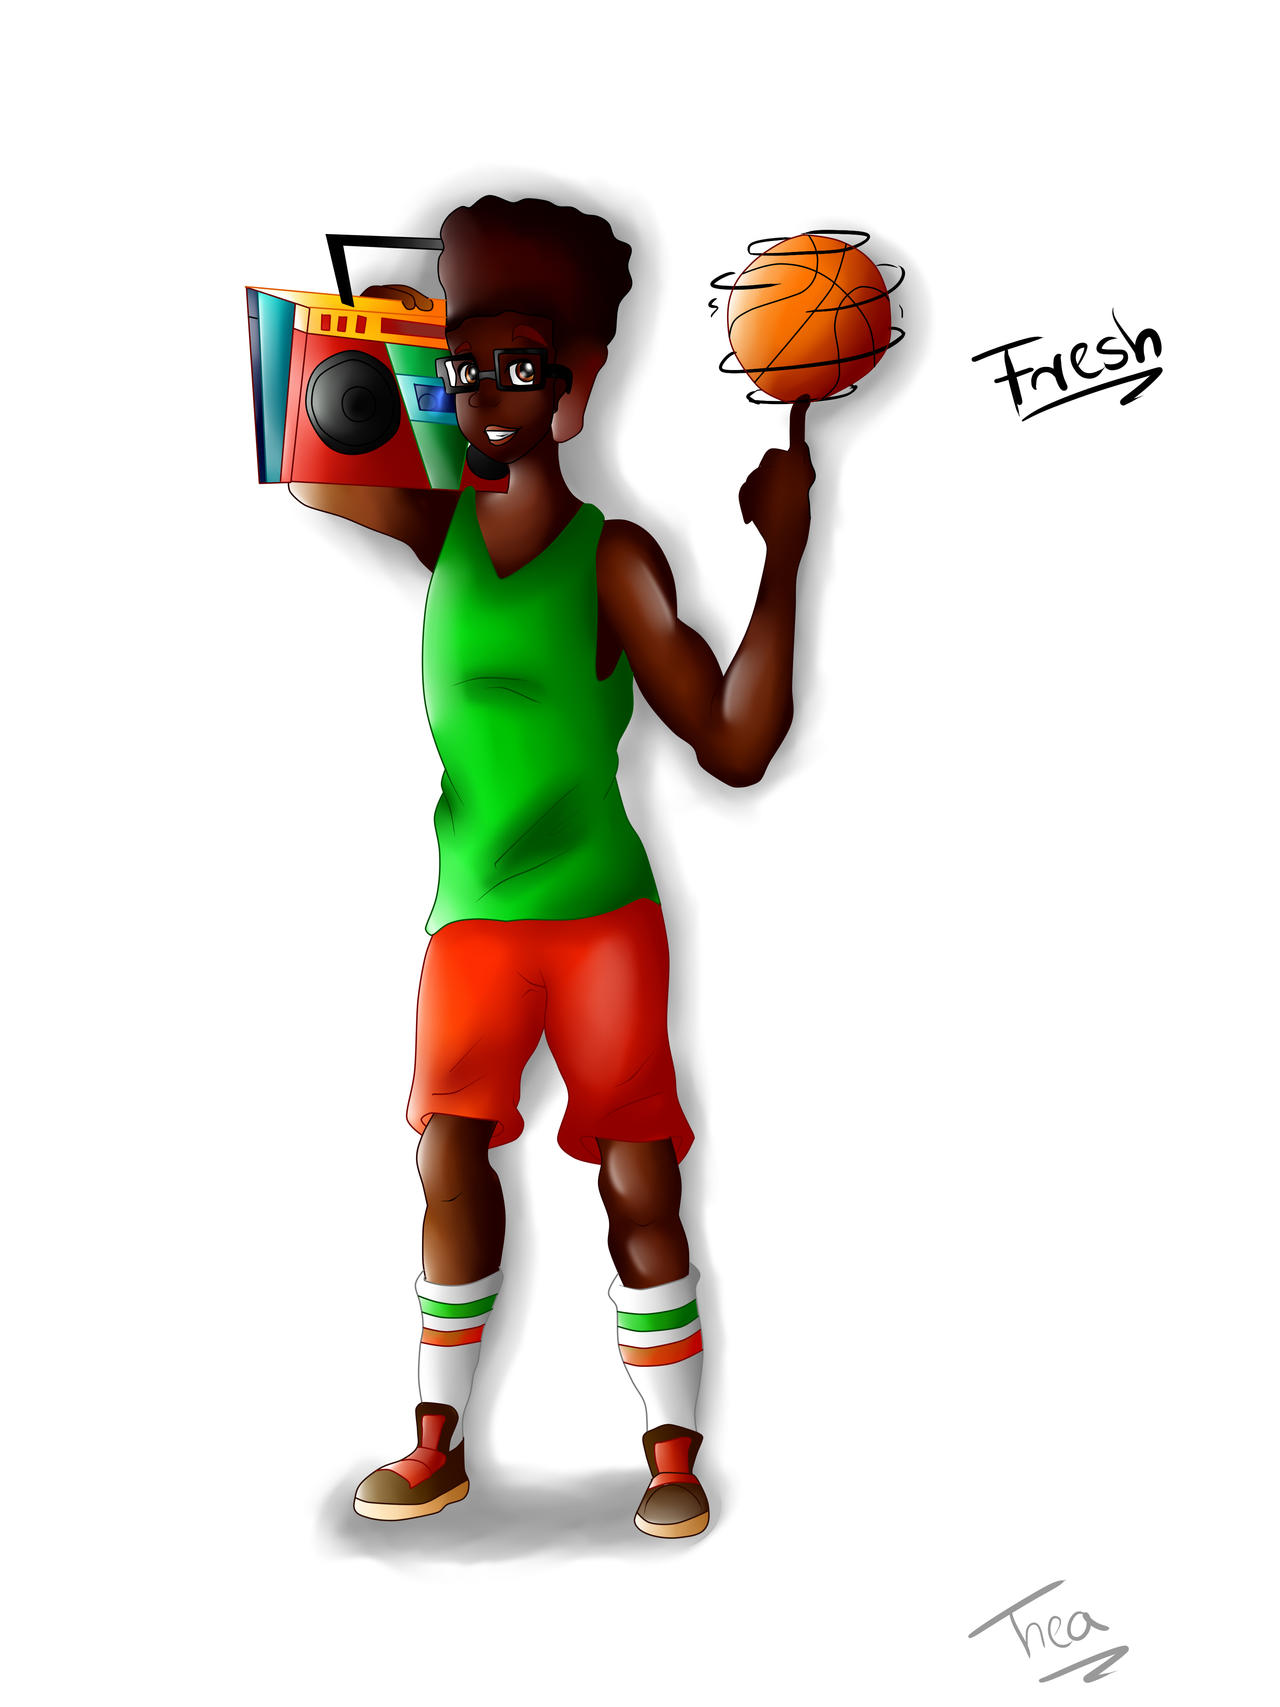 Subway Surfers: The Animated Series - Fresh by CartoonLover20 on DeviantArt